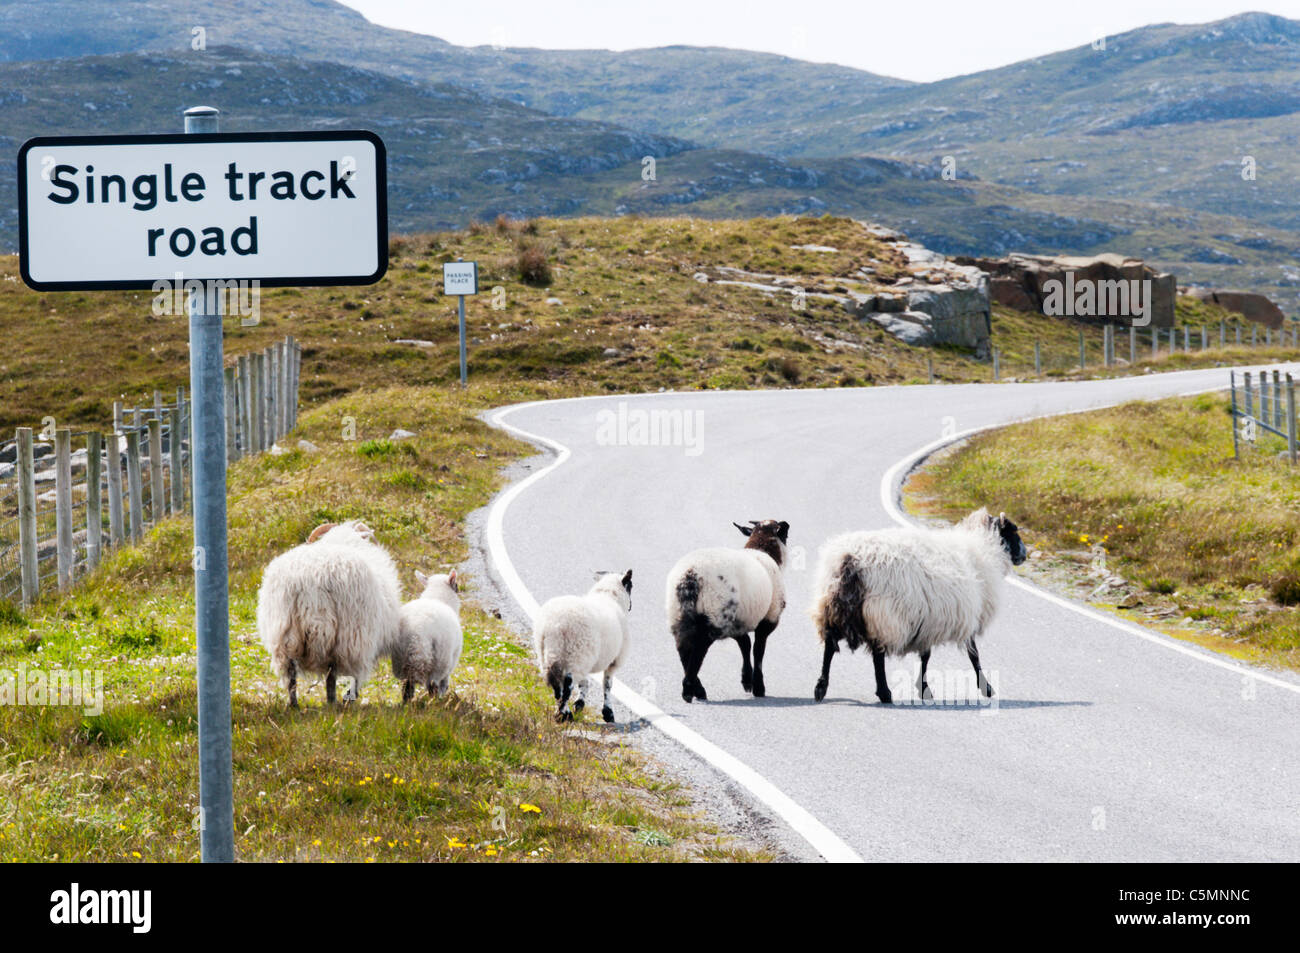 Sheep crossing a single track road in Scotland. Stock Photo